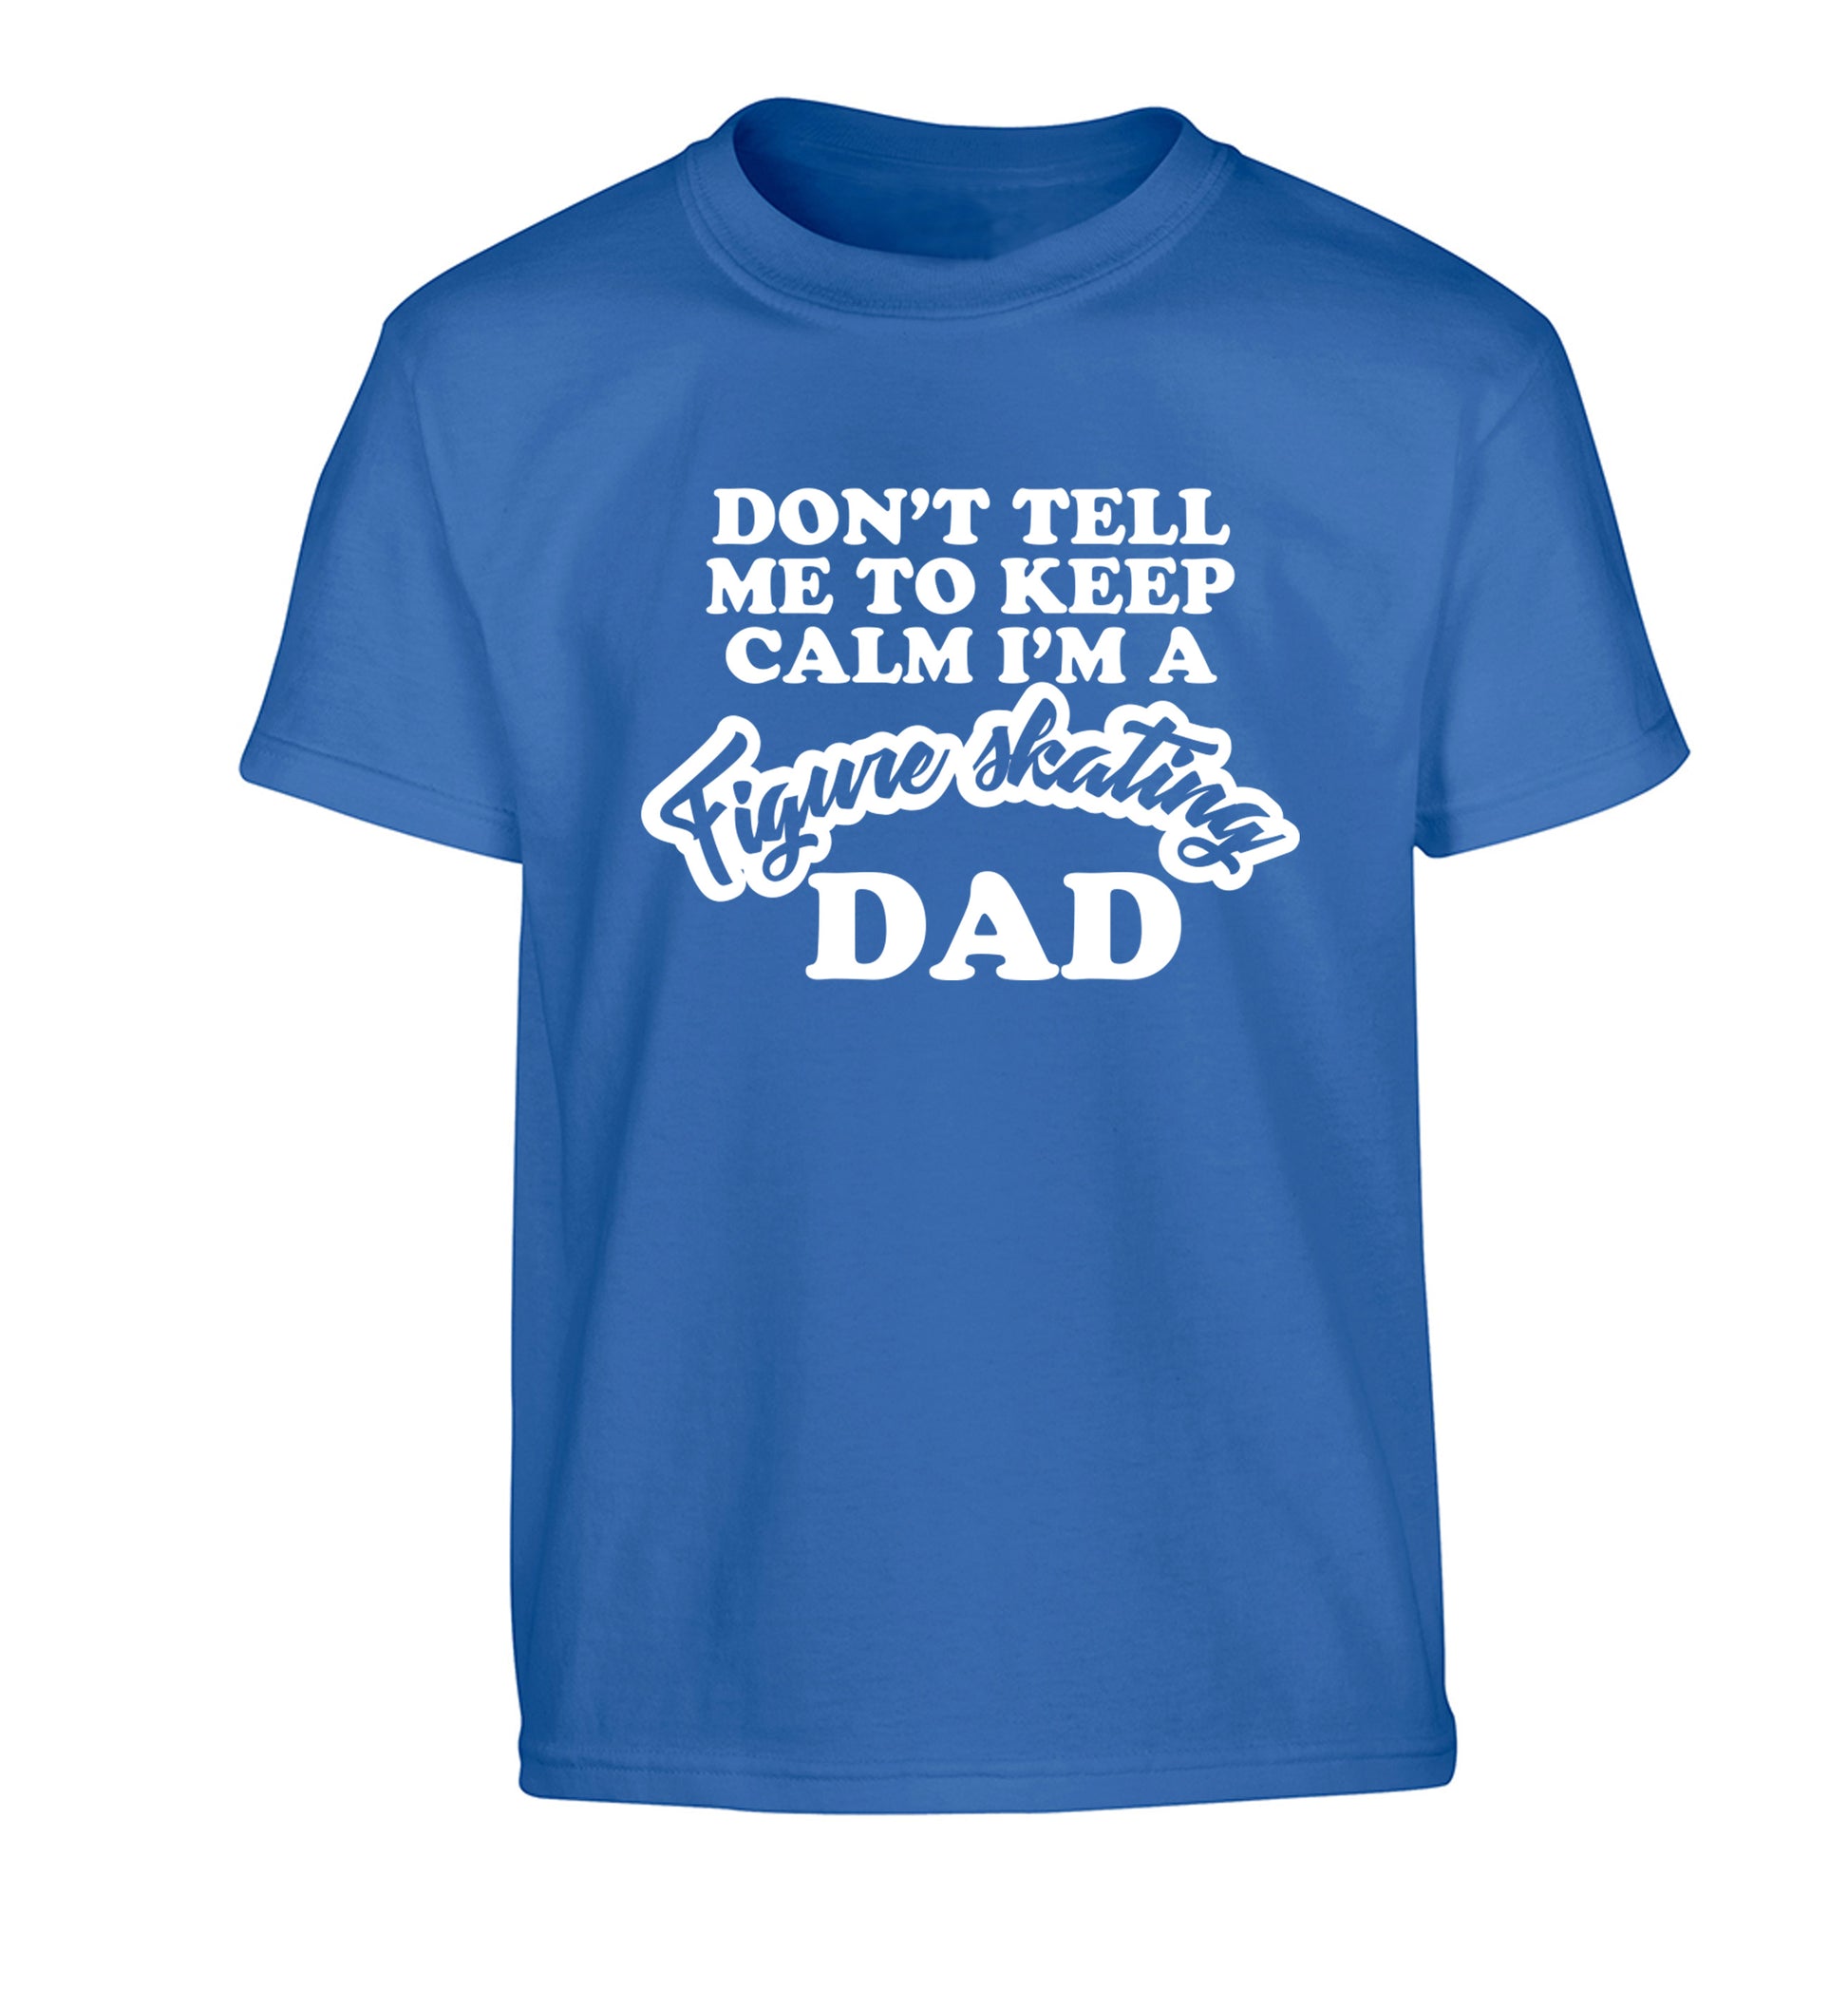 Don't tell me to keep calm I'm a figure skating dad Children's blue Tshirt 12-14 Years